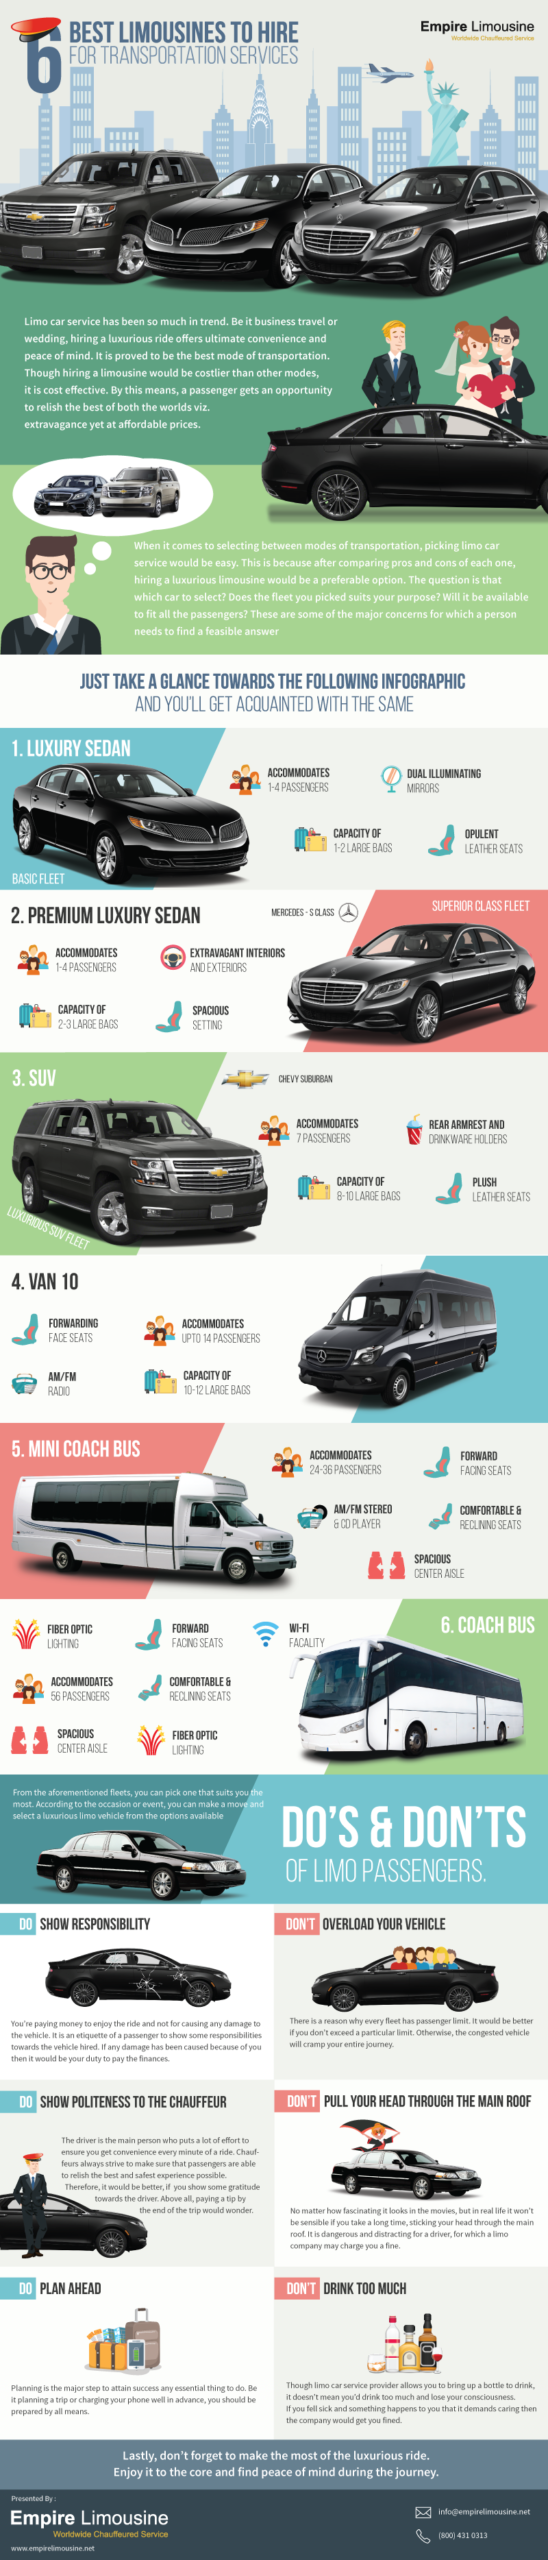 6-Best-Limousines-to-Hire-for-Transportation-Services